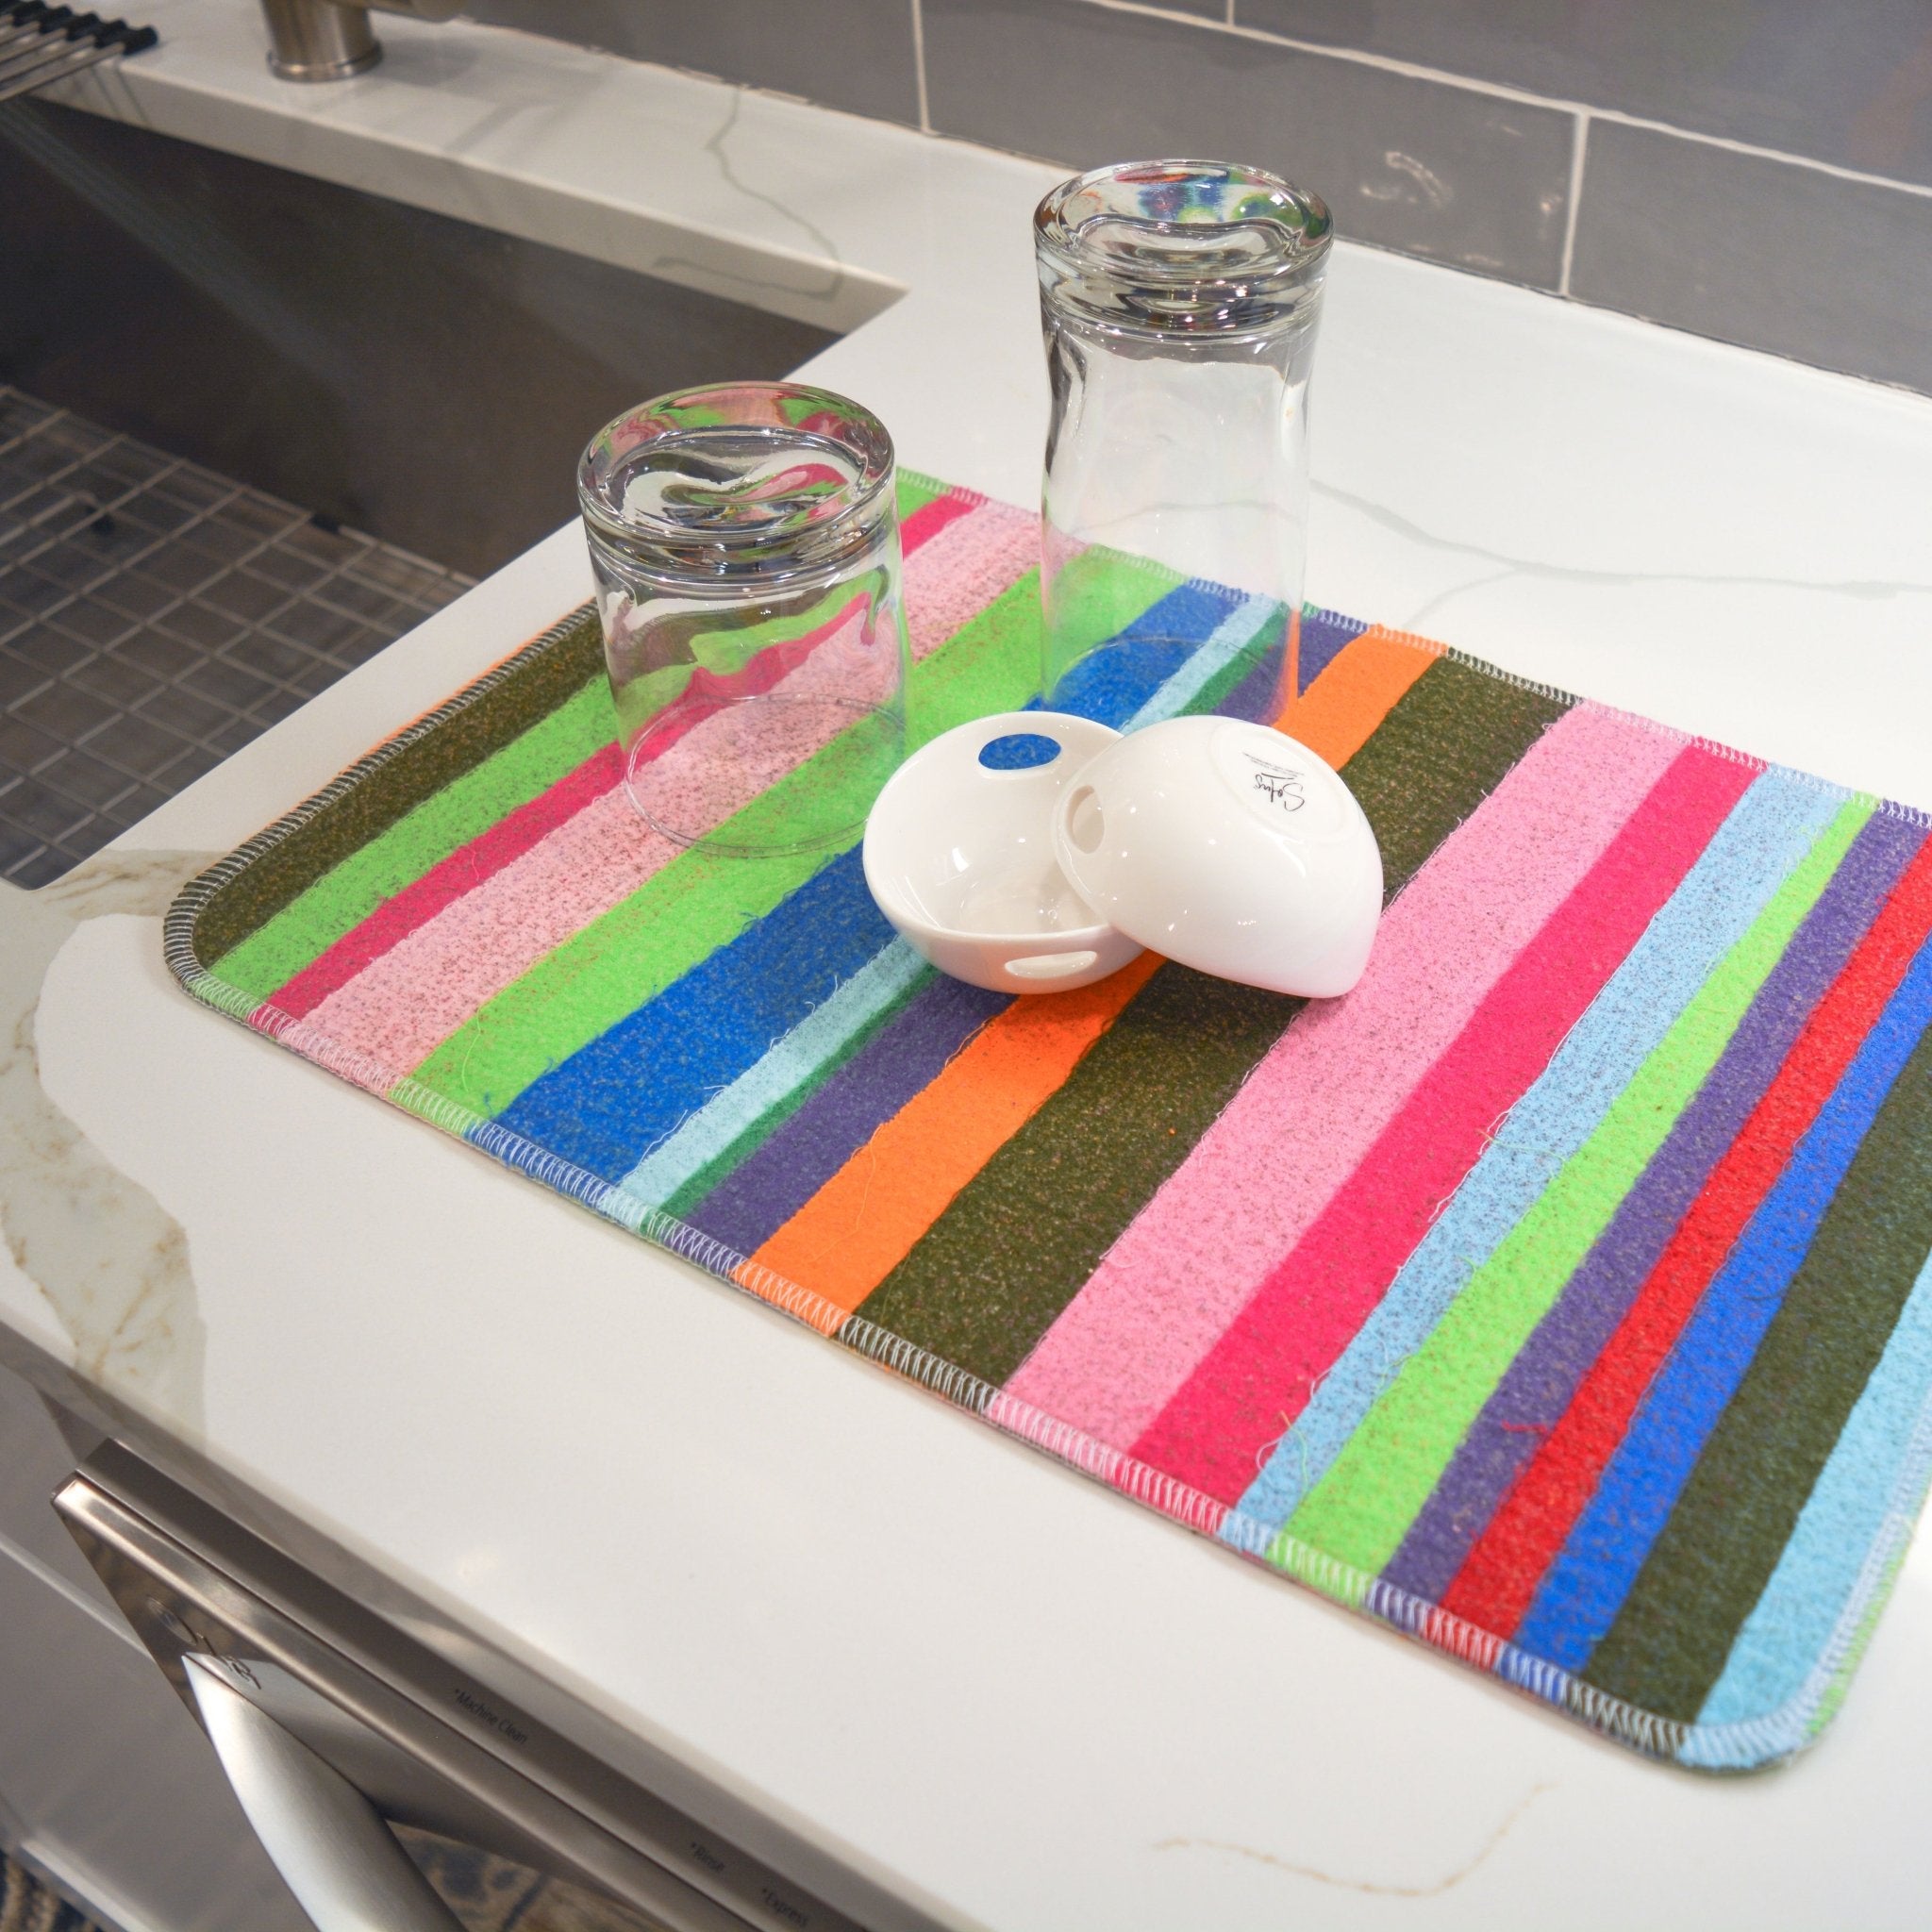 Drying Mat for Kitchen Counter Placemat Mashine Washable Dish Rack